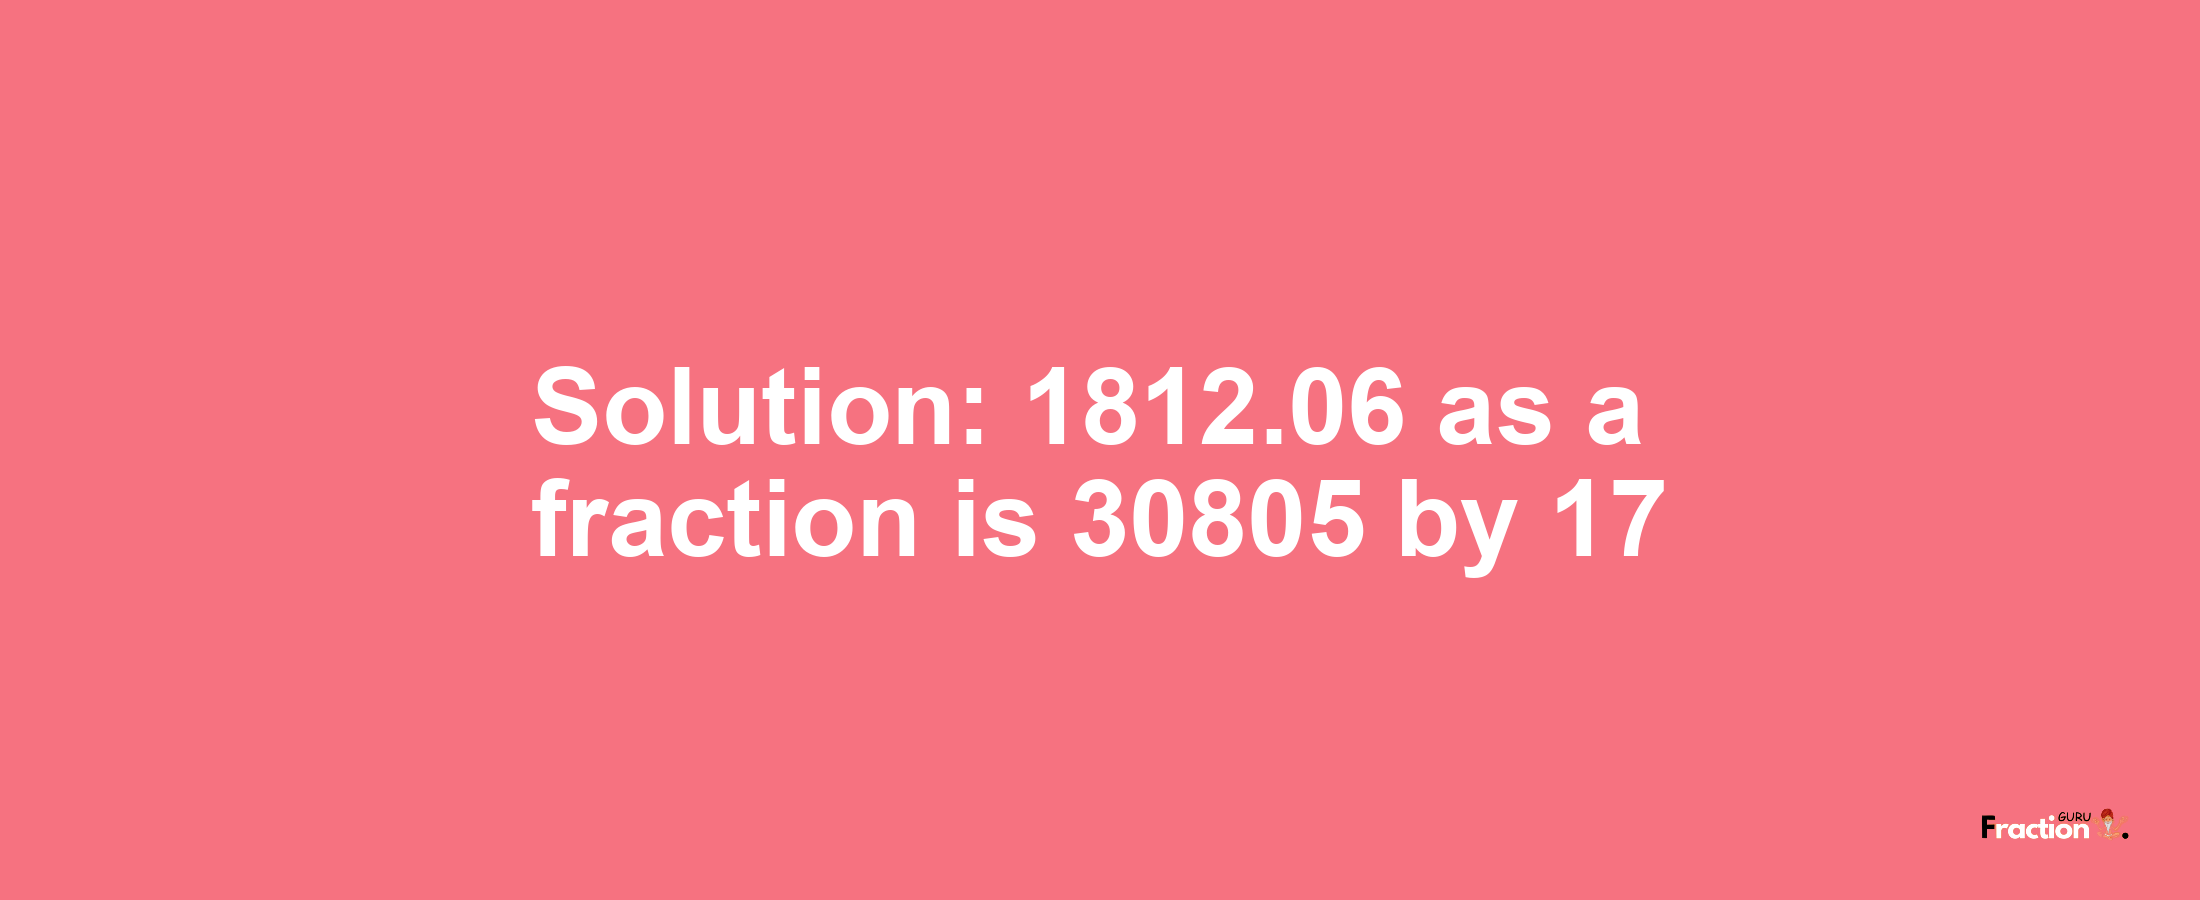 Solution:1812.06 as a fraction is 30805/17